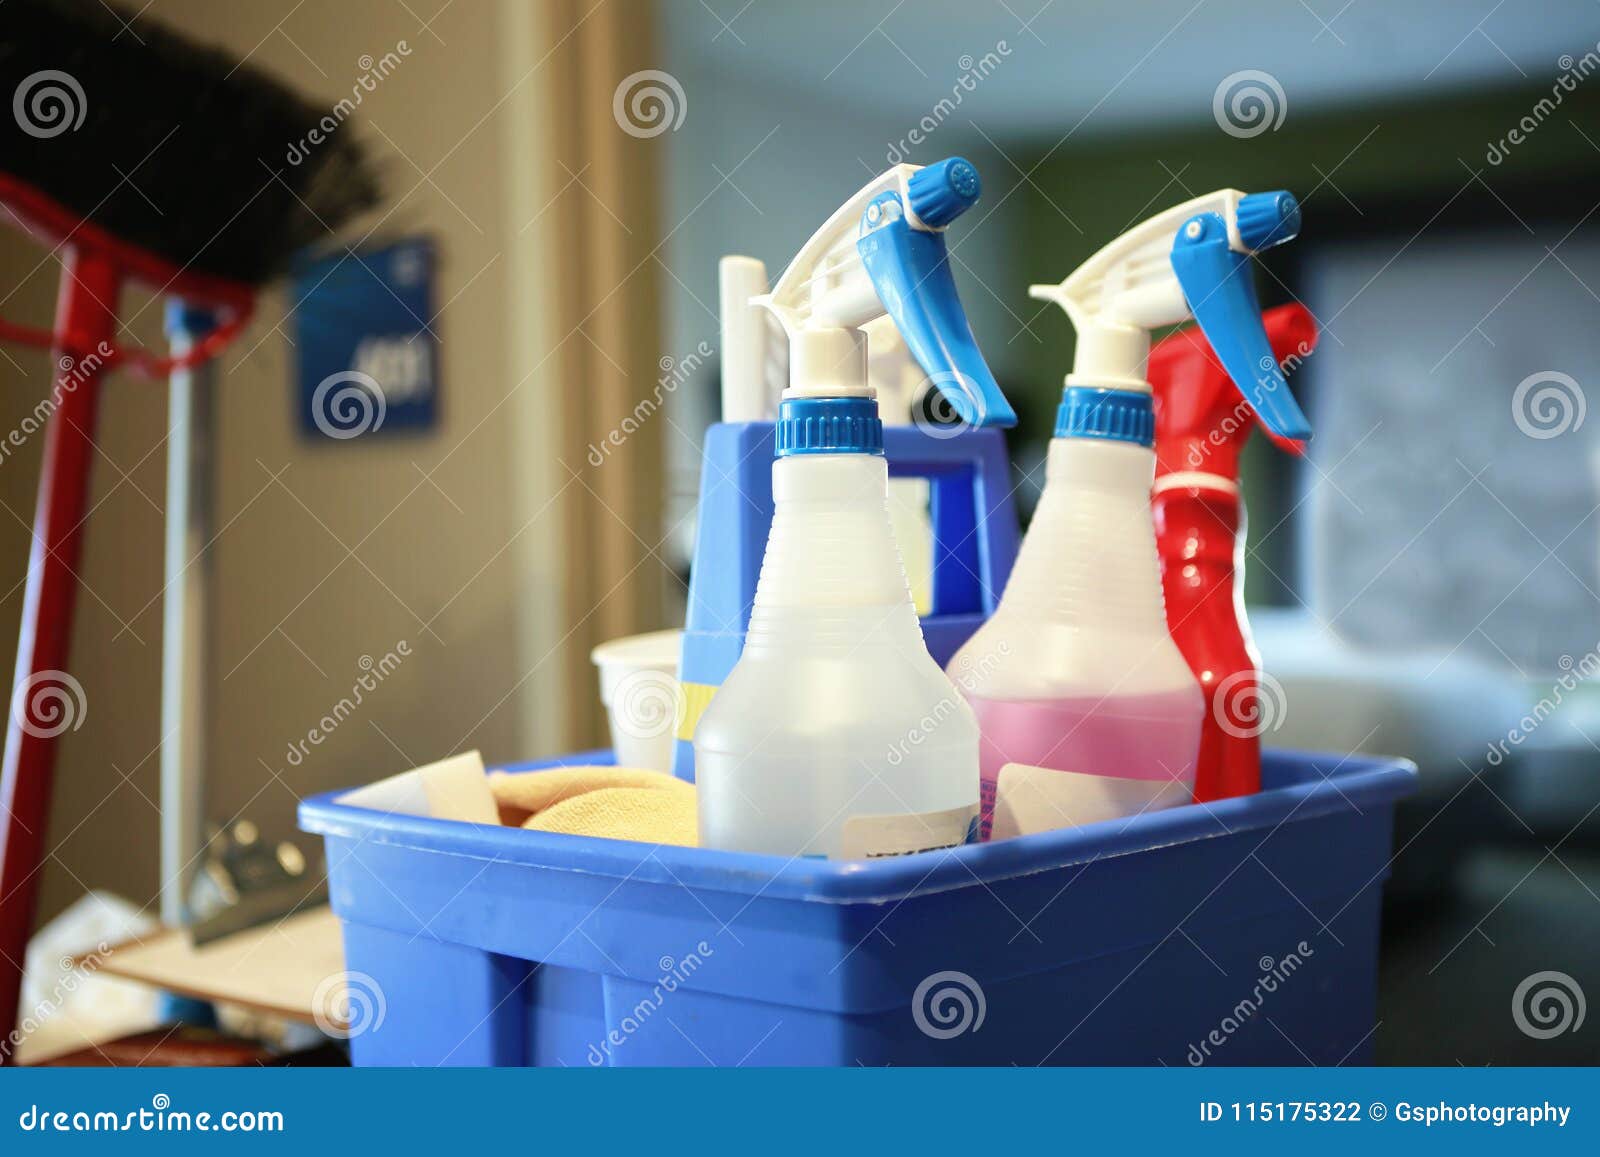 https://thumbs.dreamstime.com/z/cleaning-tools-concept-hotel-hallway-cleaners-cart-equipment-115175322.jpg